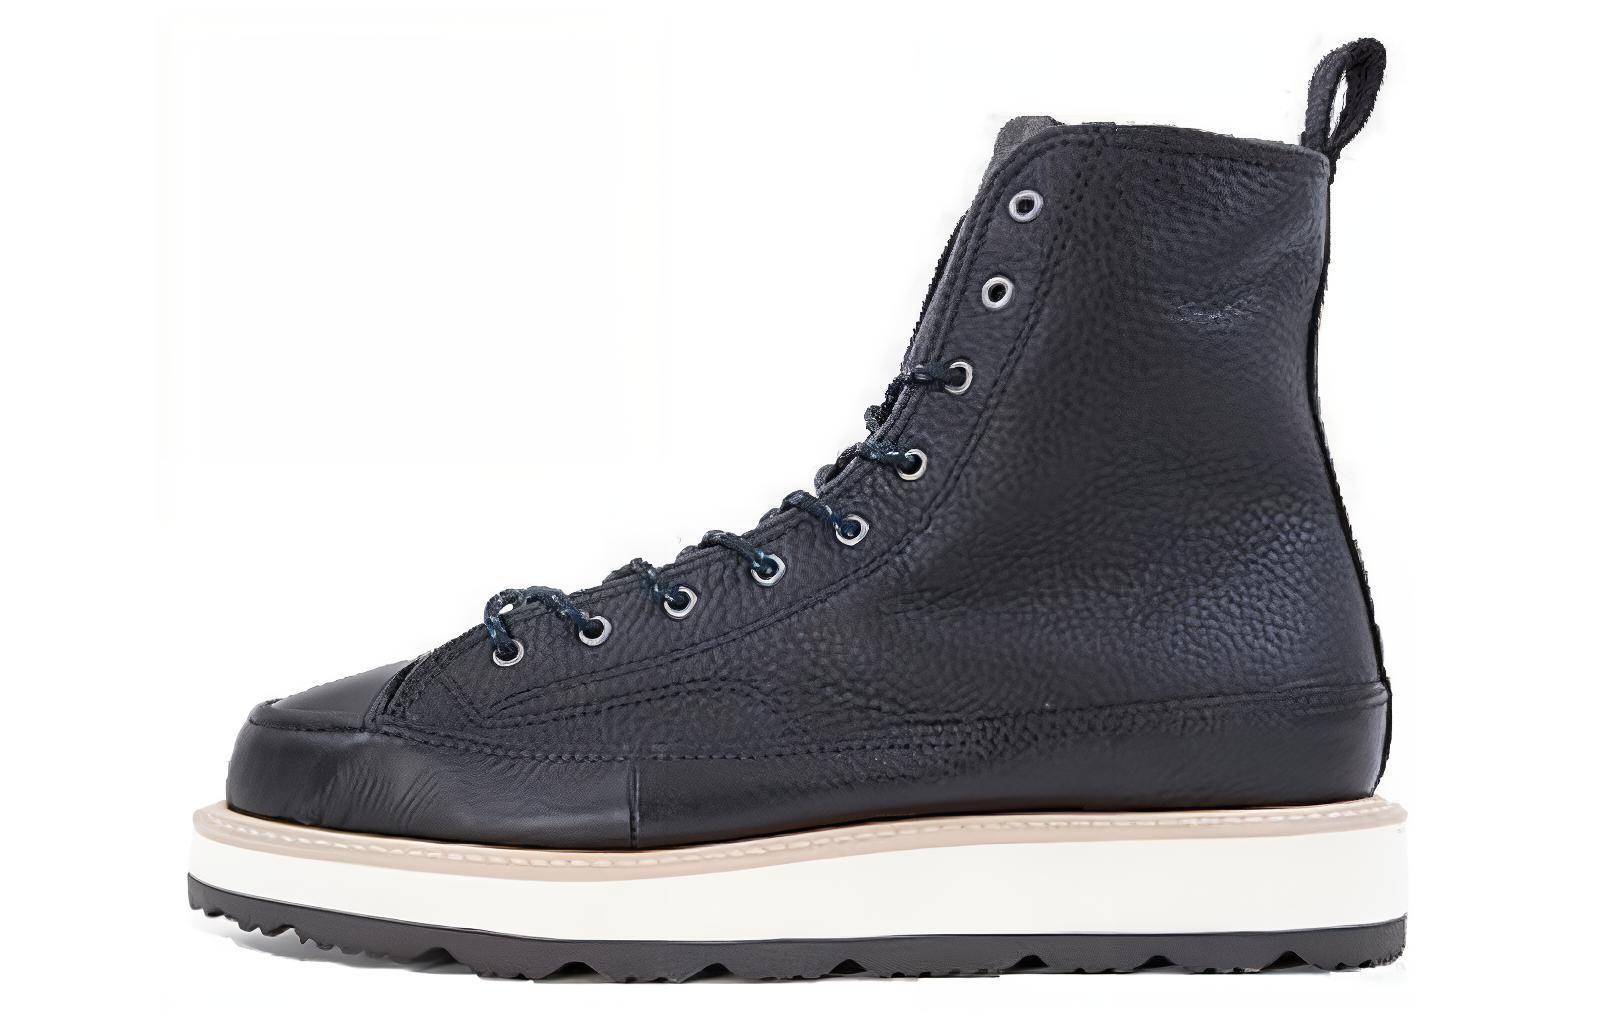 Converse Chuck Taylor All Star Crafted High Top